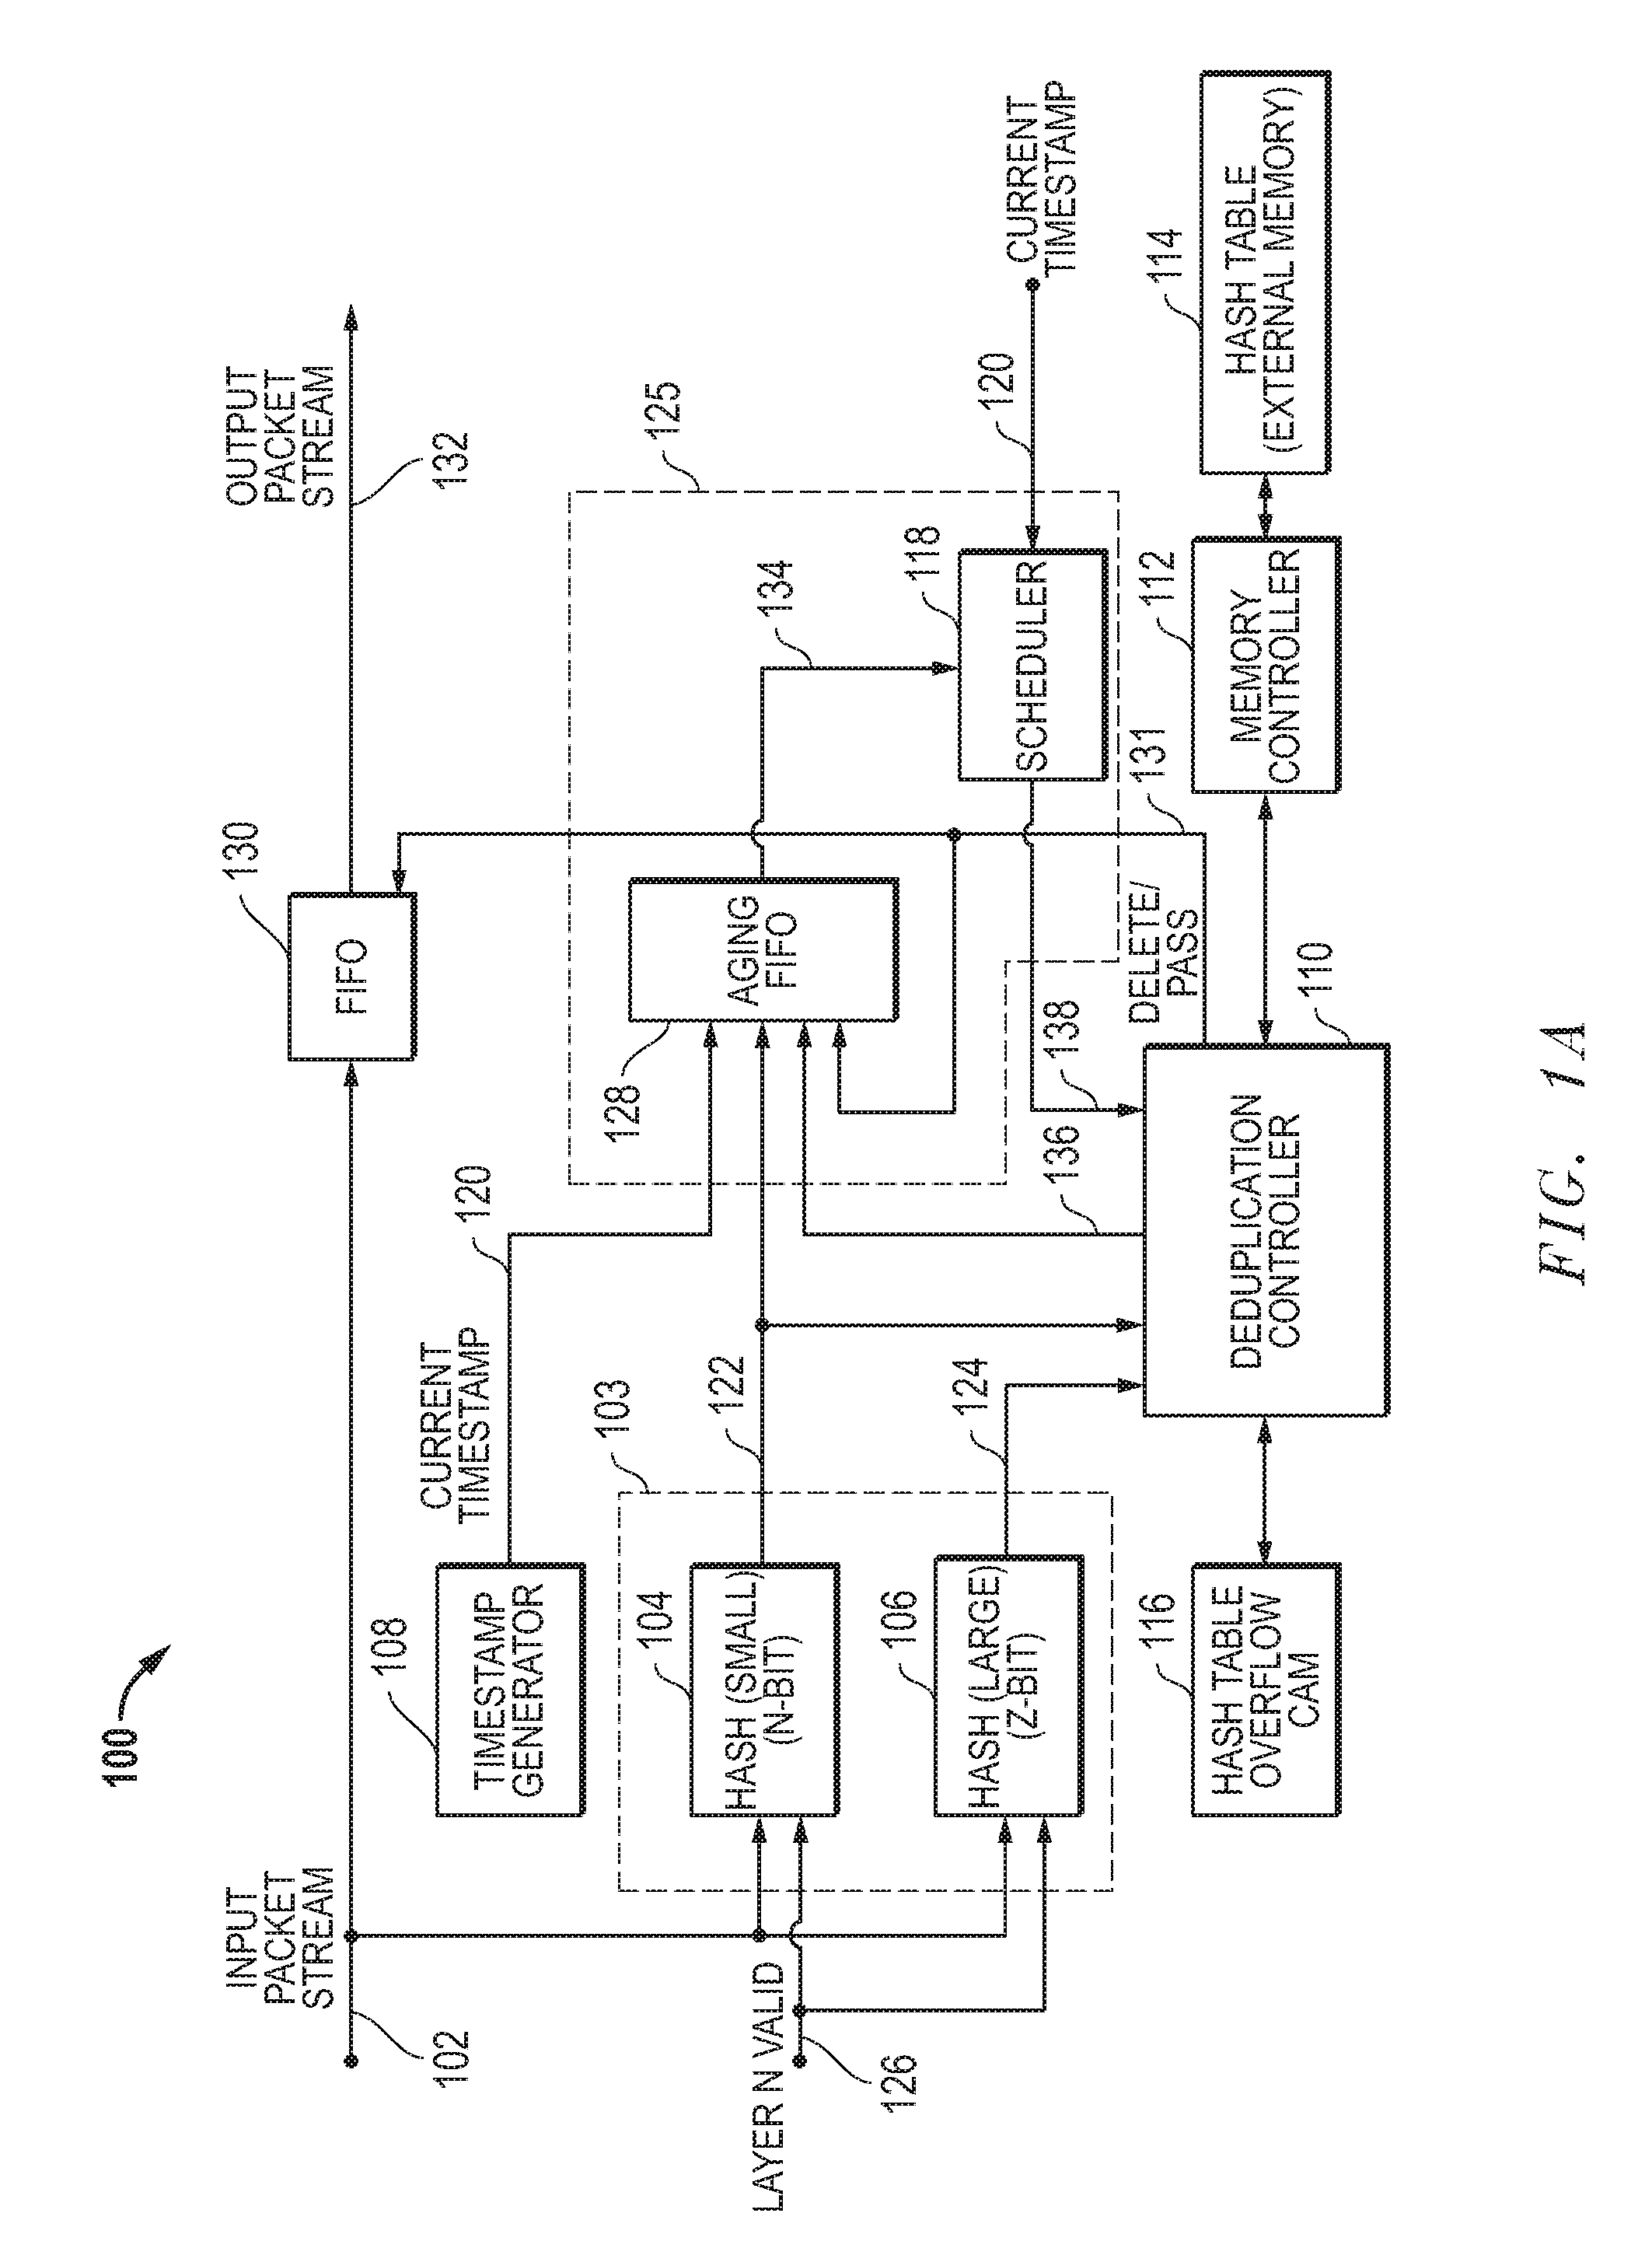 Systems and methods for in-line removal of duplicate network packets